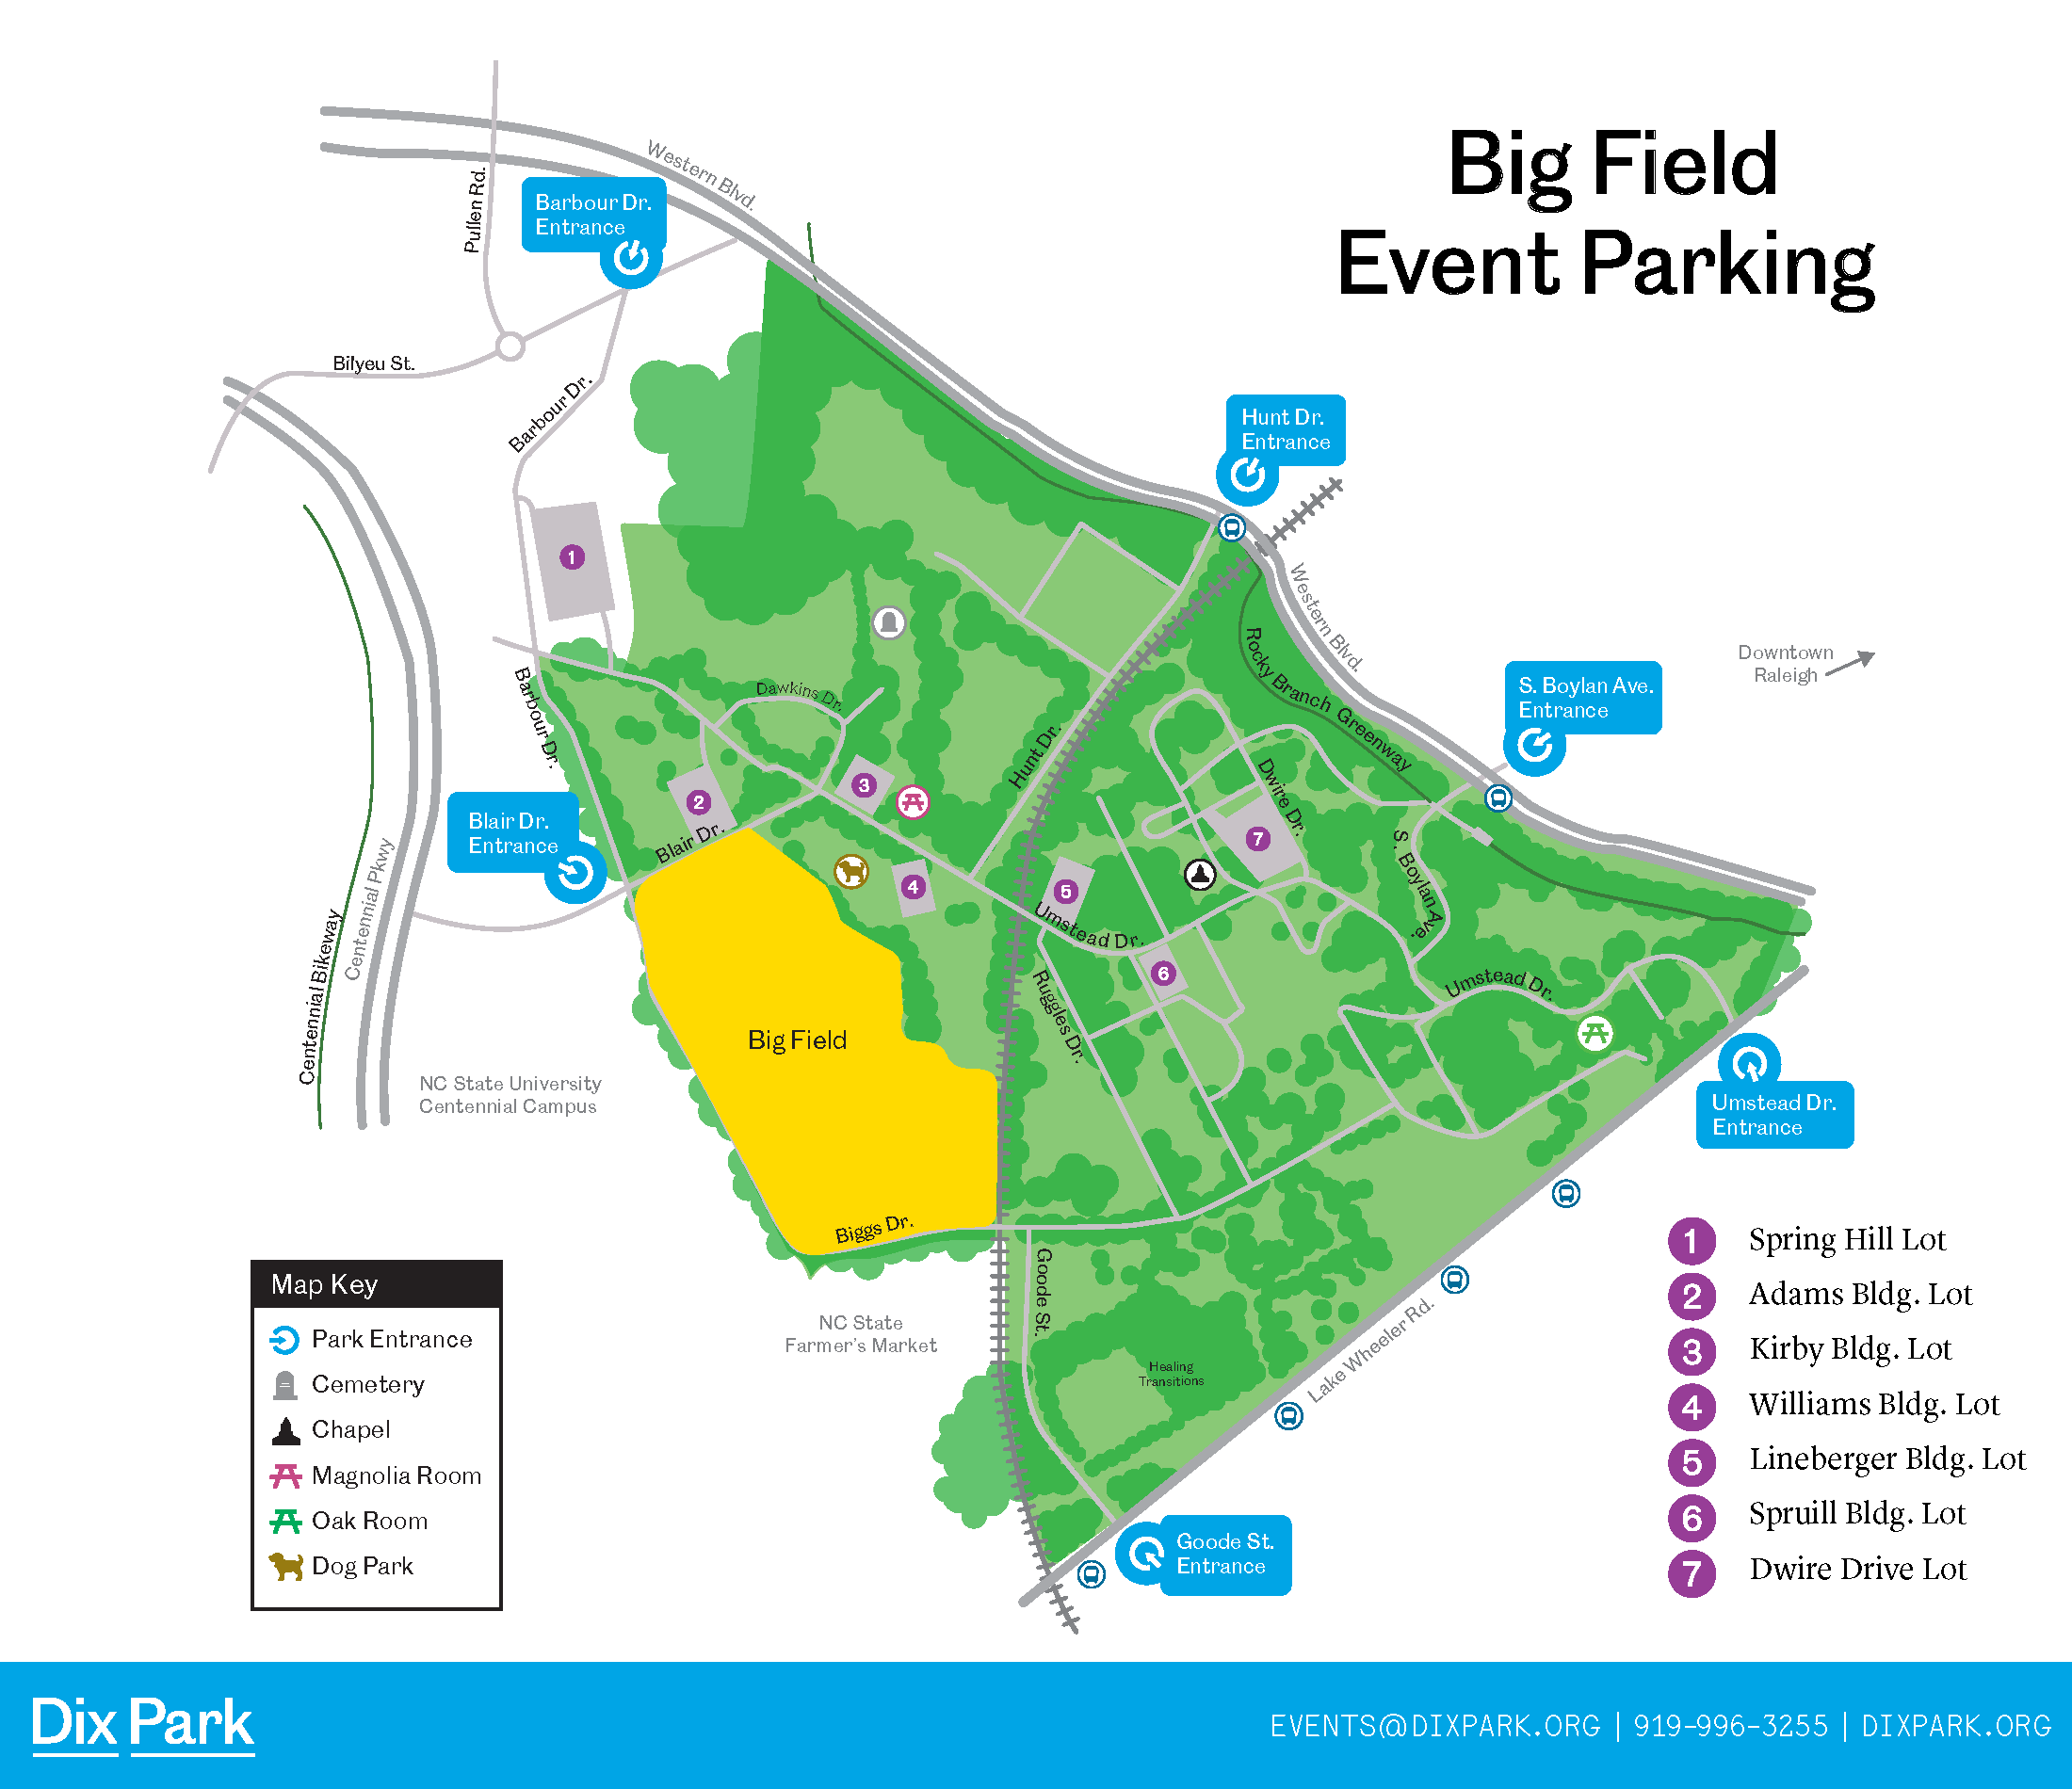 Parking Map for events on the Big Field 